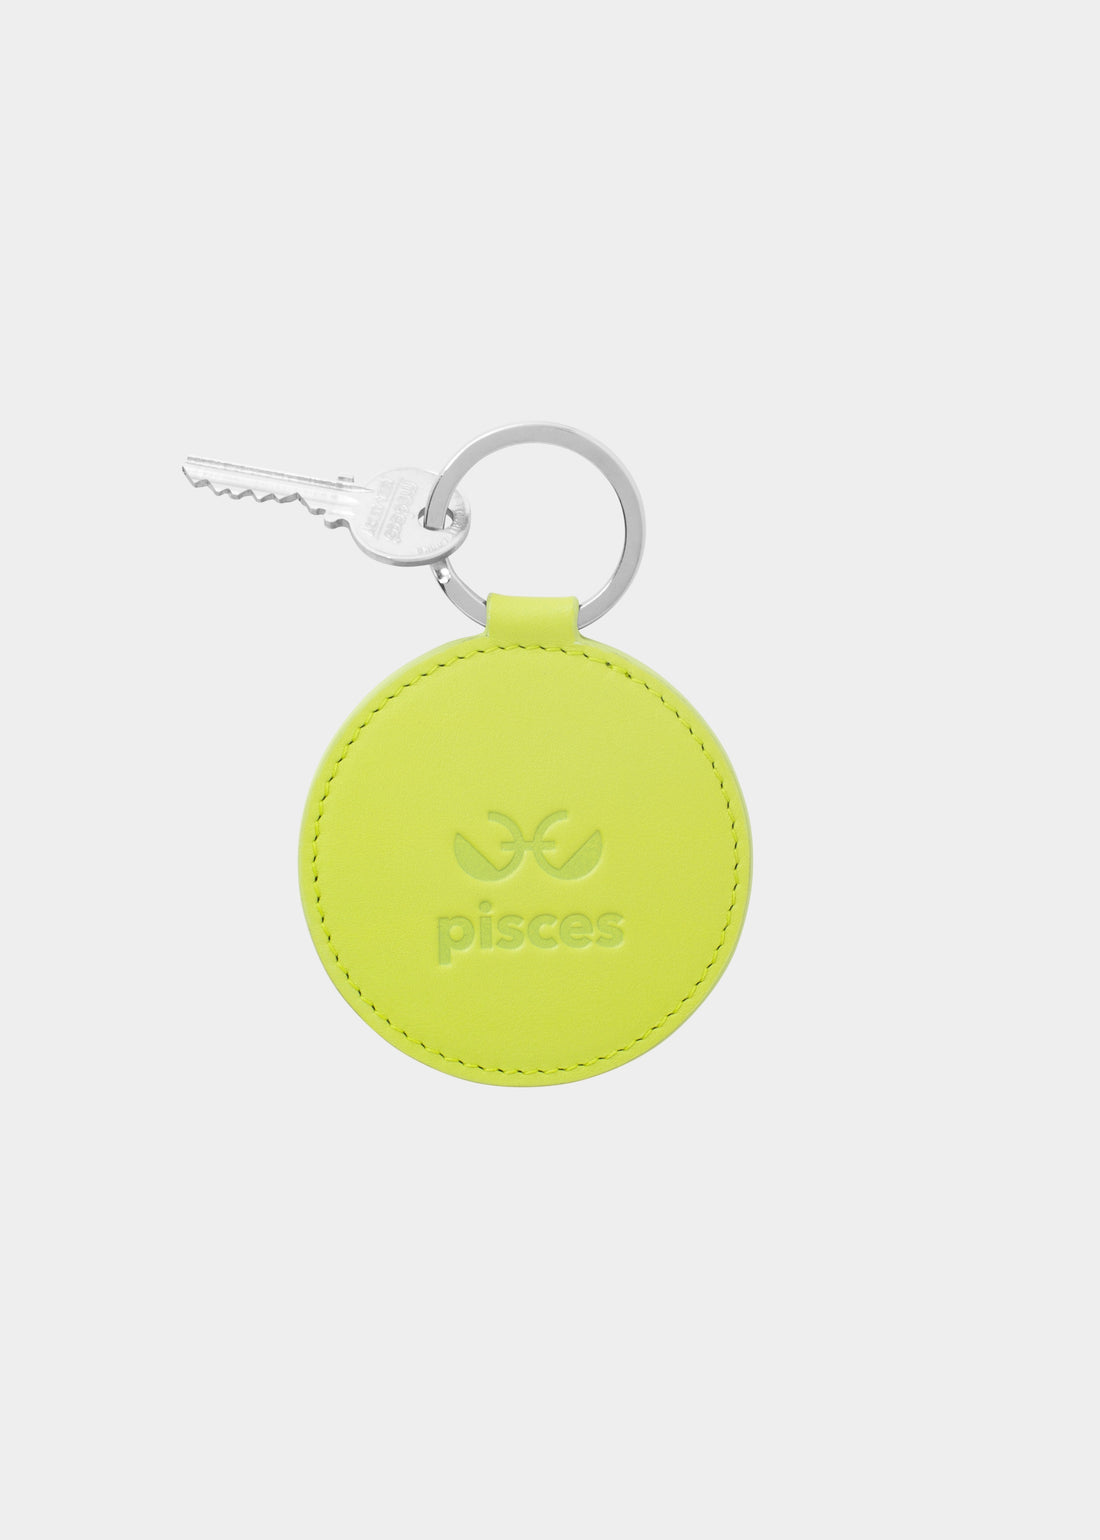 Dooz Pisces lime green keychain with embossed zodiac glyph and silver keyring